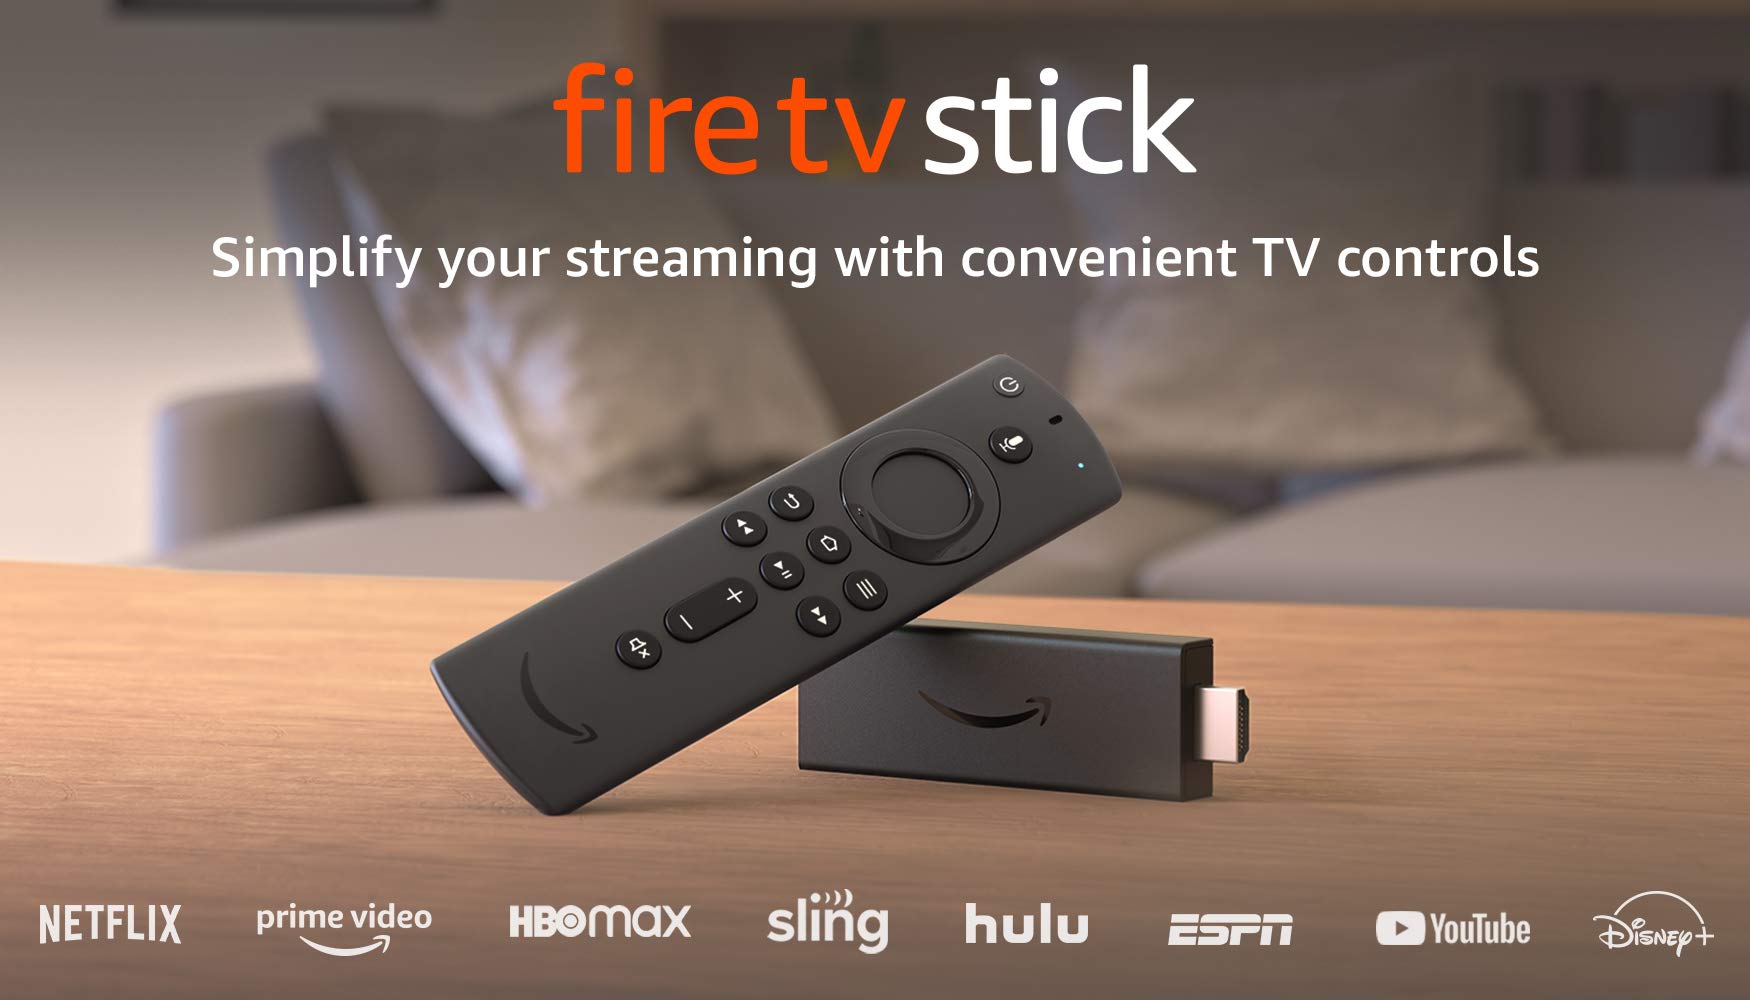 Fire TV Stick with Alexa Voice Remote (includes TV controls) | HD streaming device | 2020 release